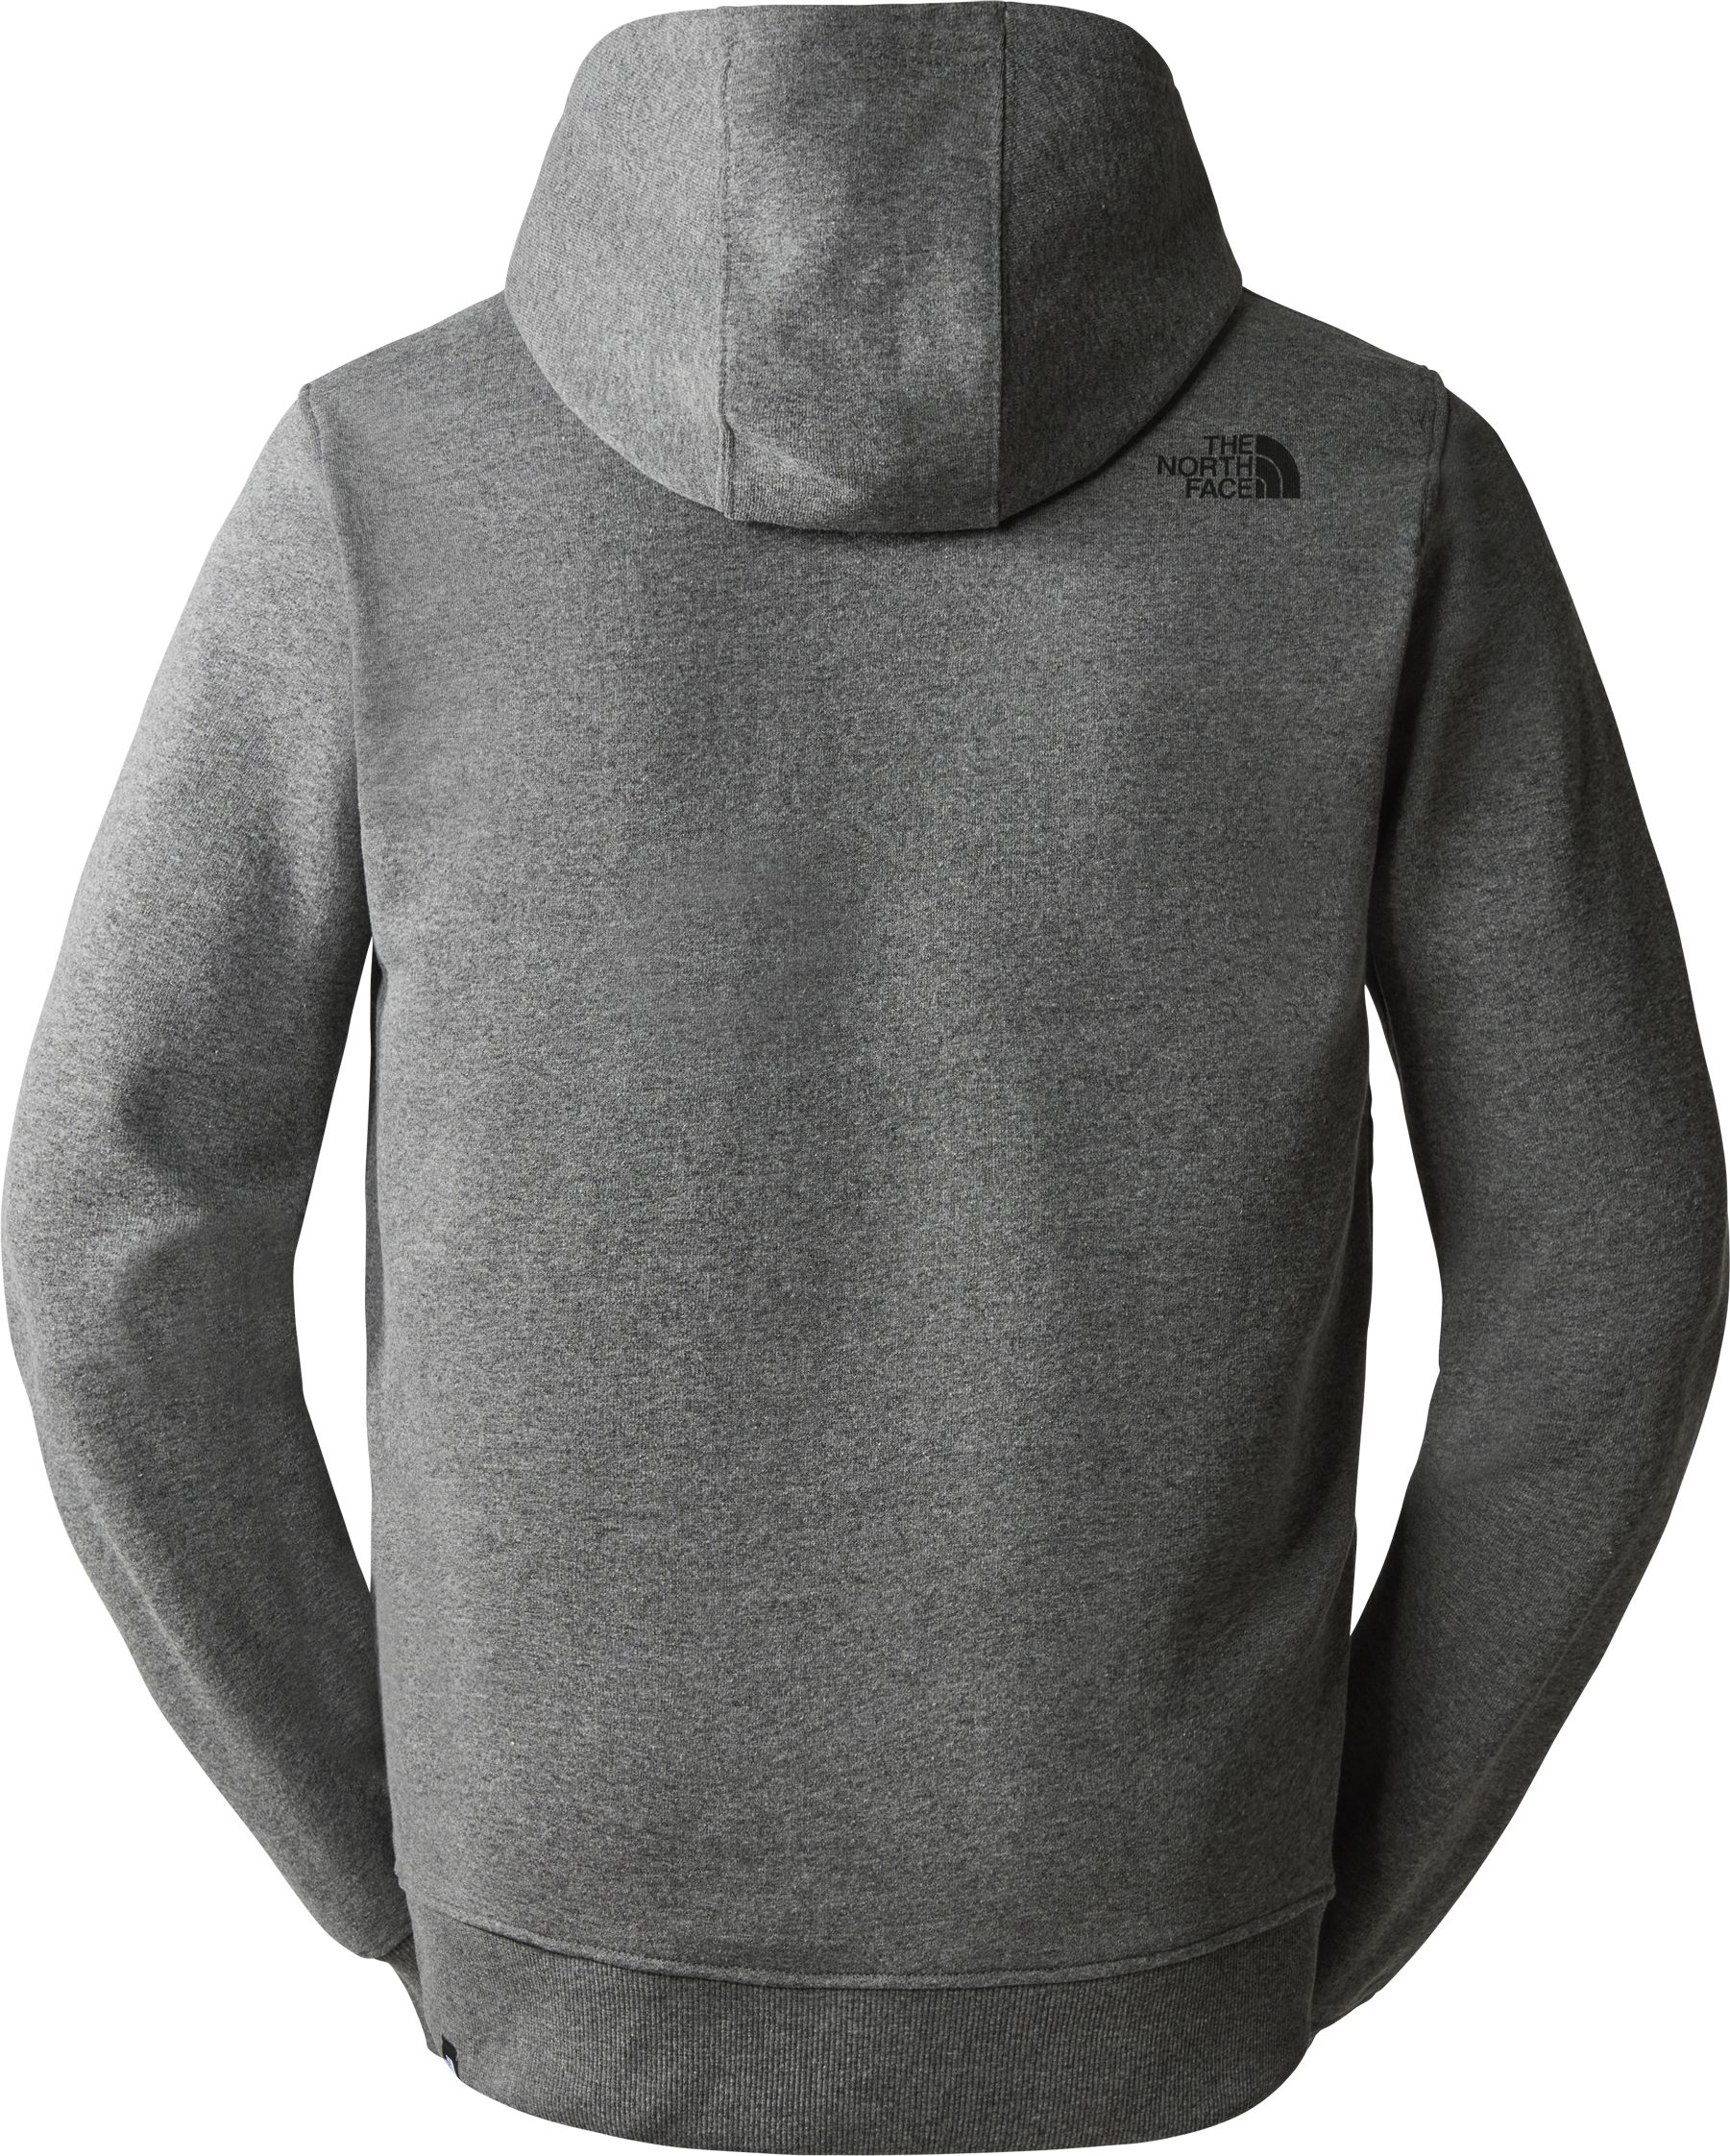 THE NORTH FACE, M SD HOODIE